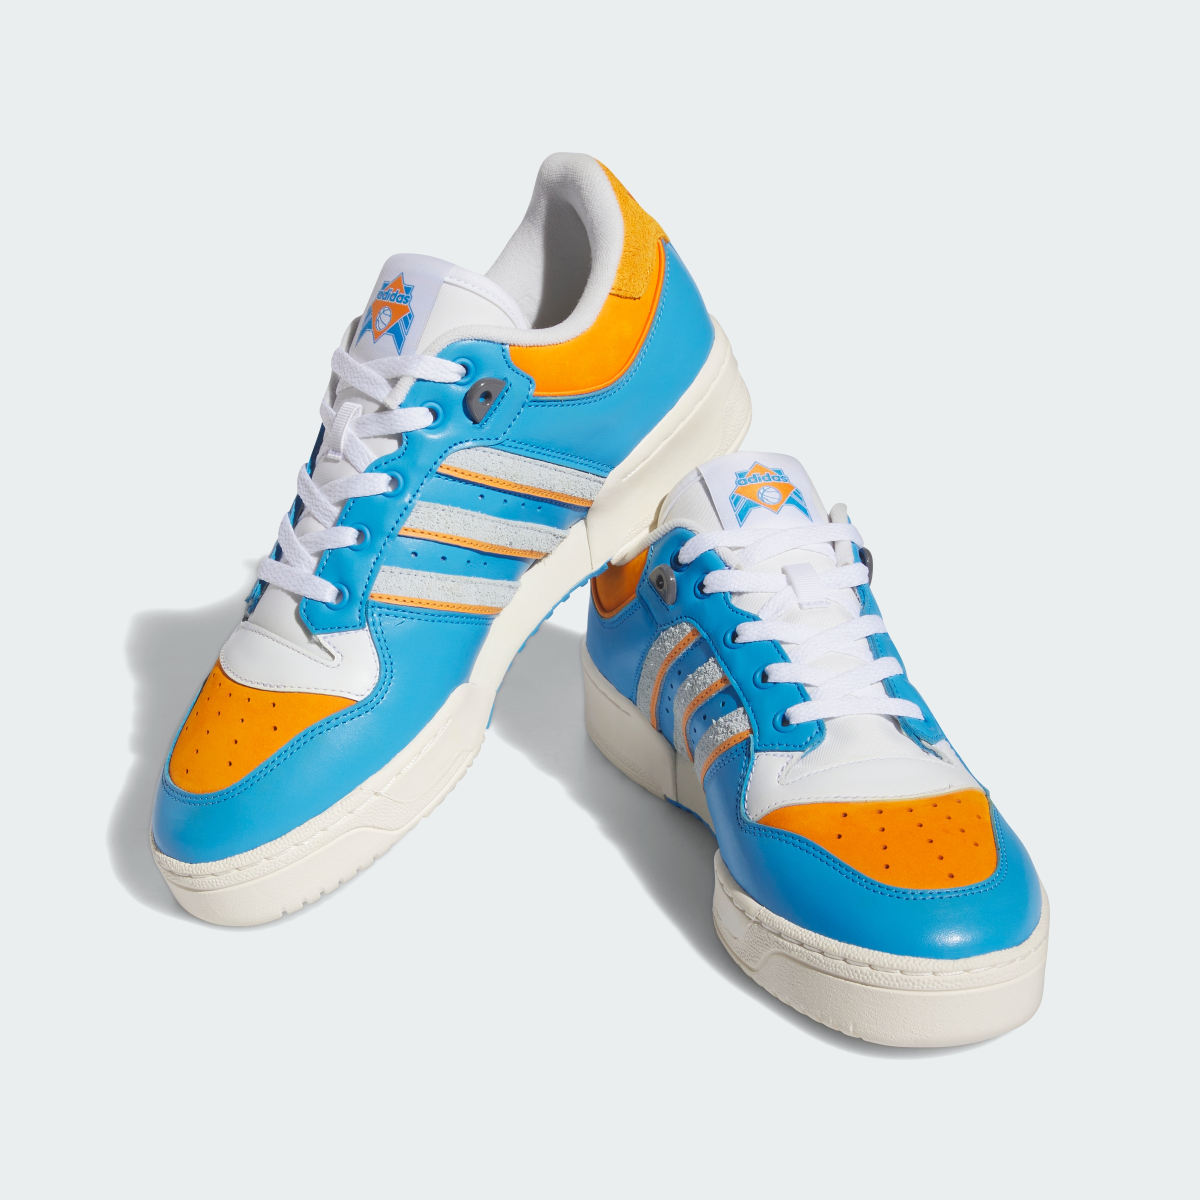 Adidas Rivalry Low Itchy. 7